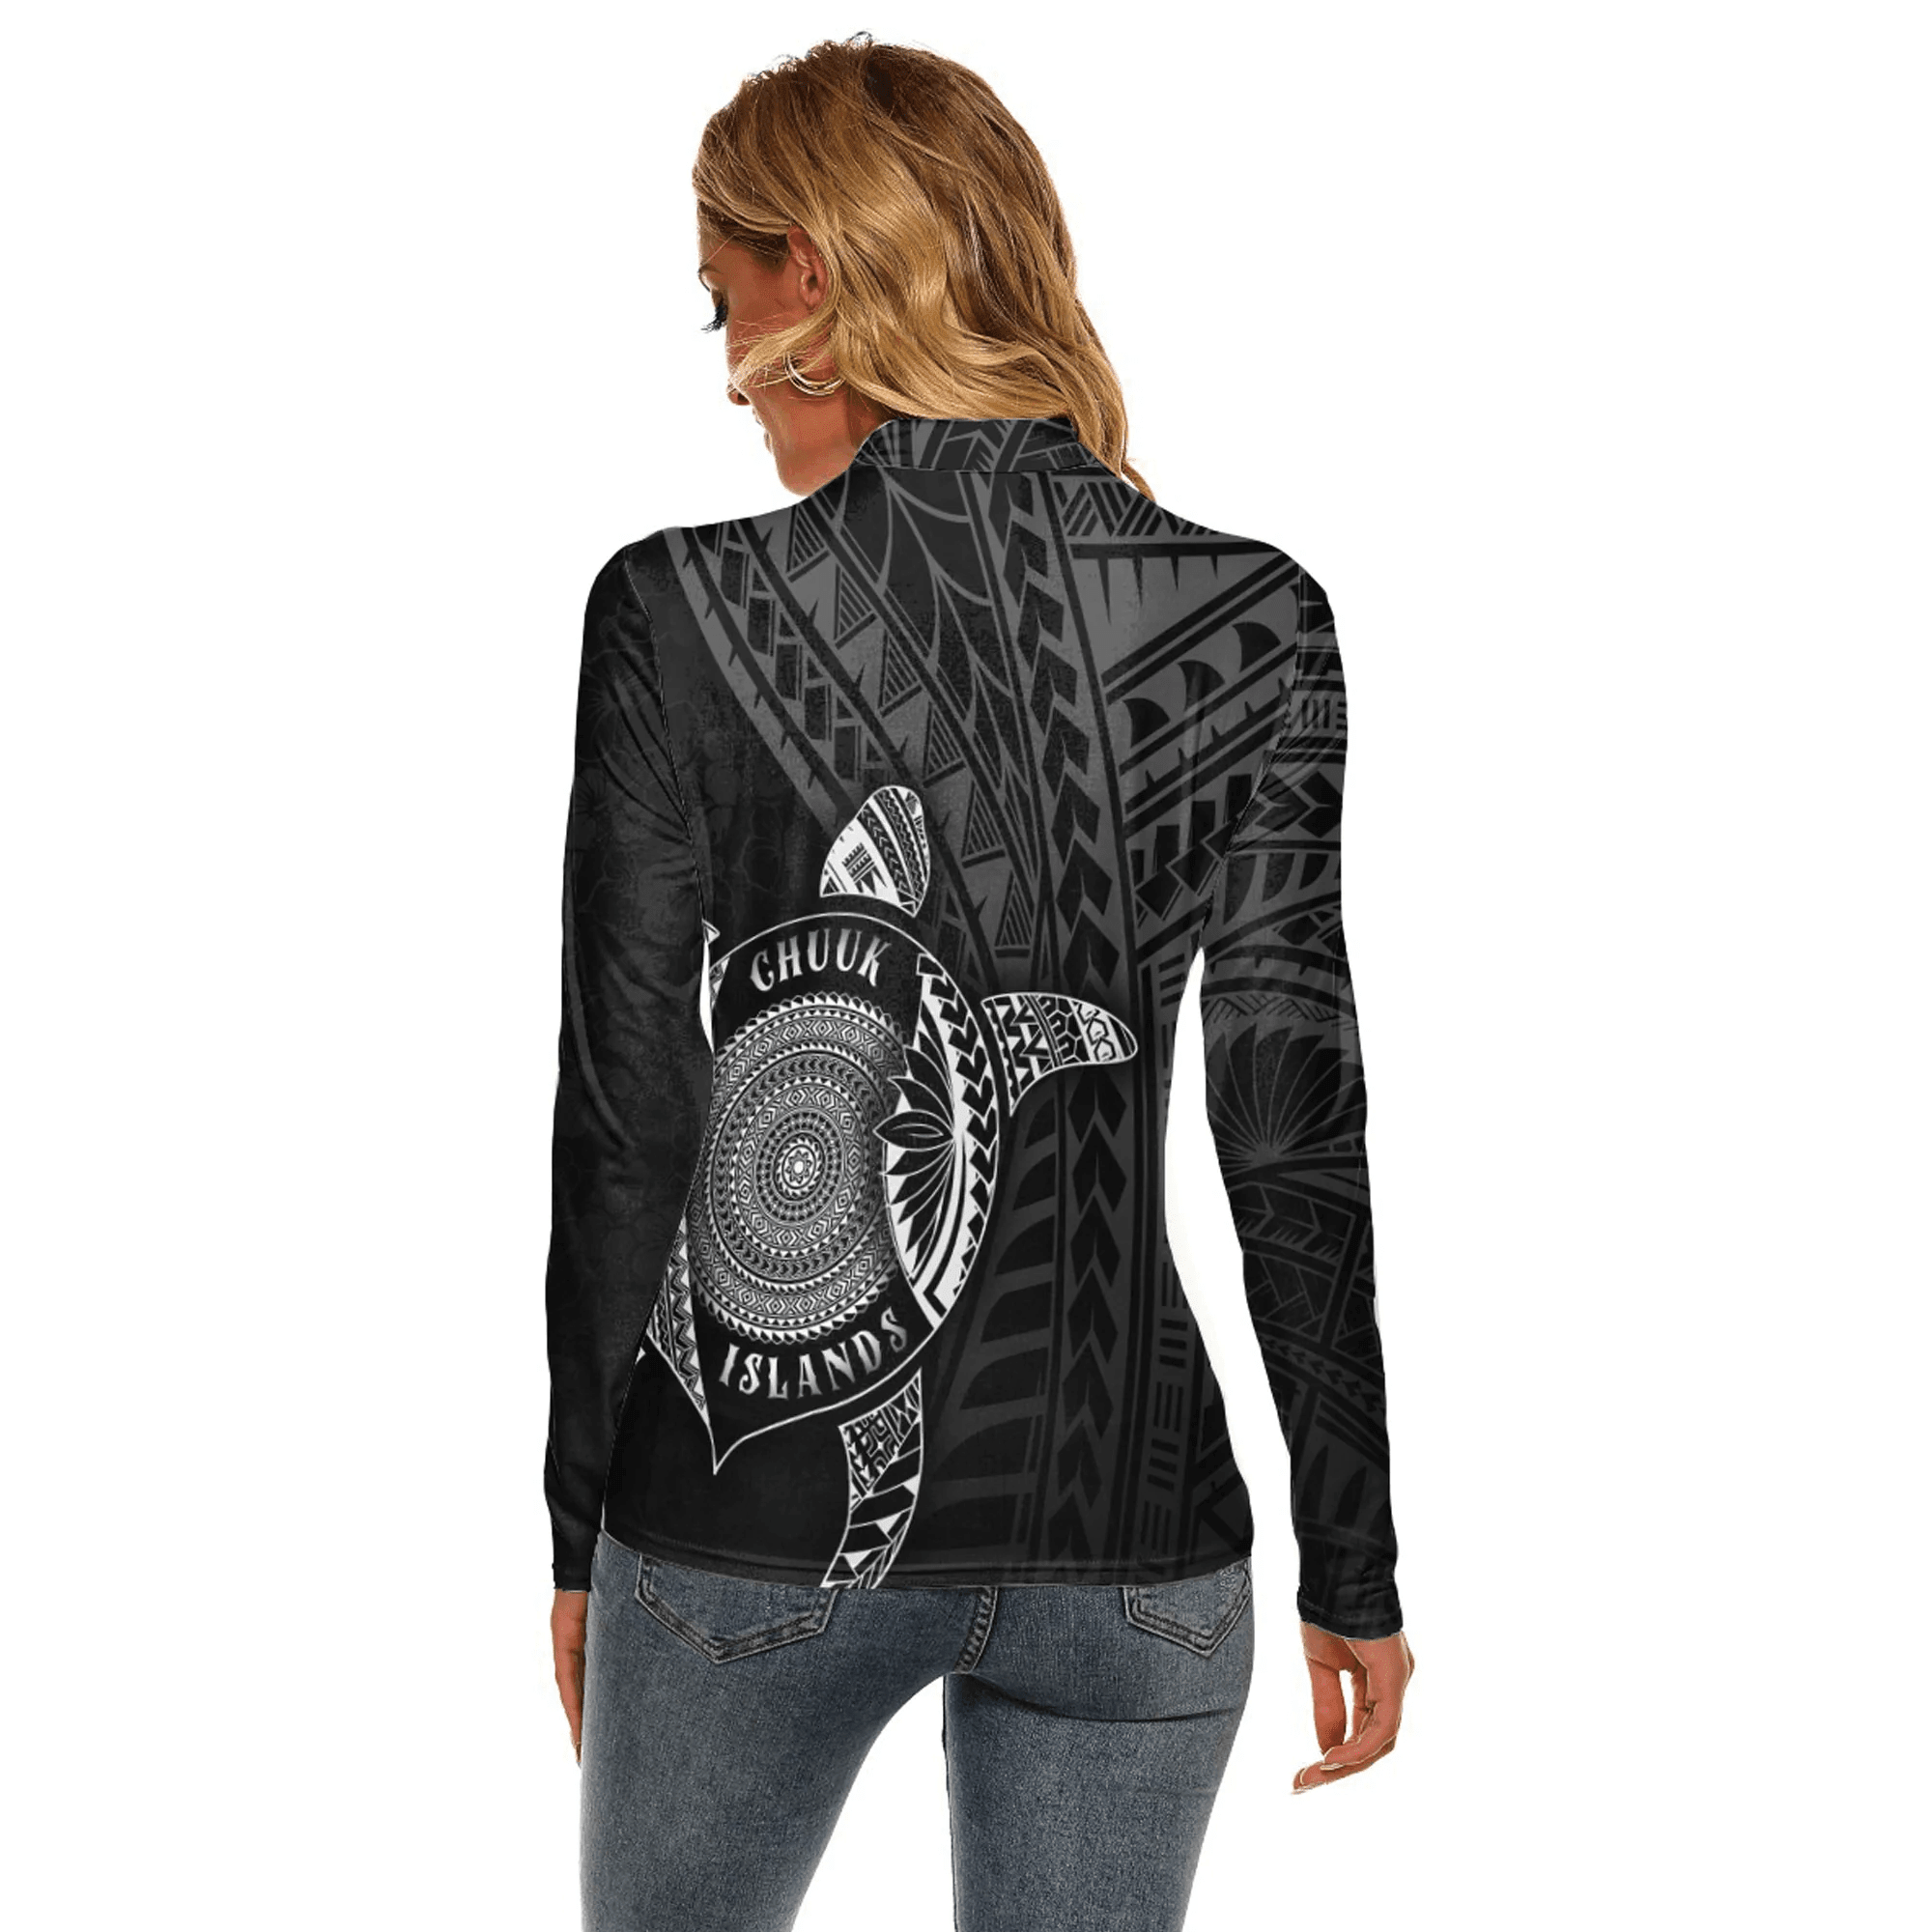 Love New Zealand Clothing - Chuuk Islands Polynesia Turtle Coat Of Arms Women's Stretchable Turtleneck Top A95 | Love New Zealand